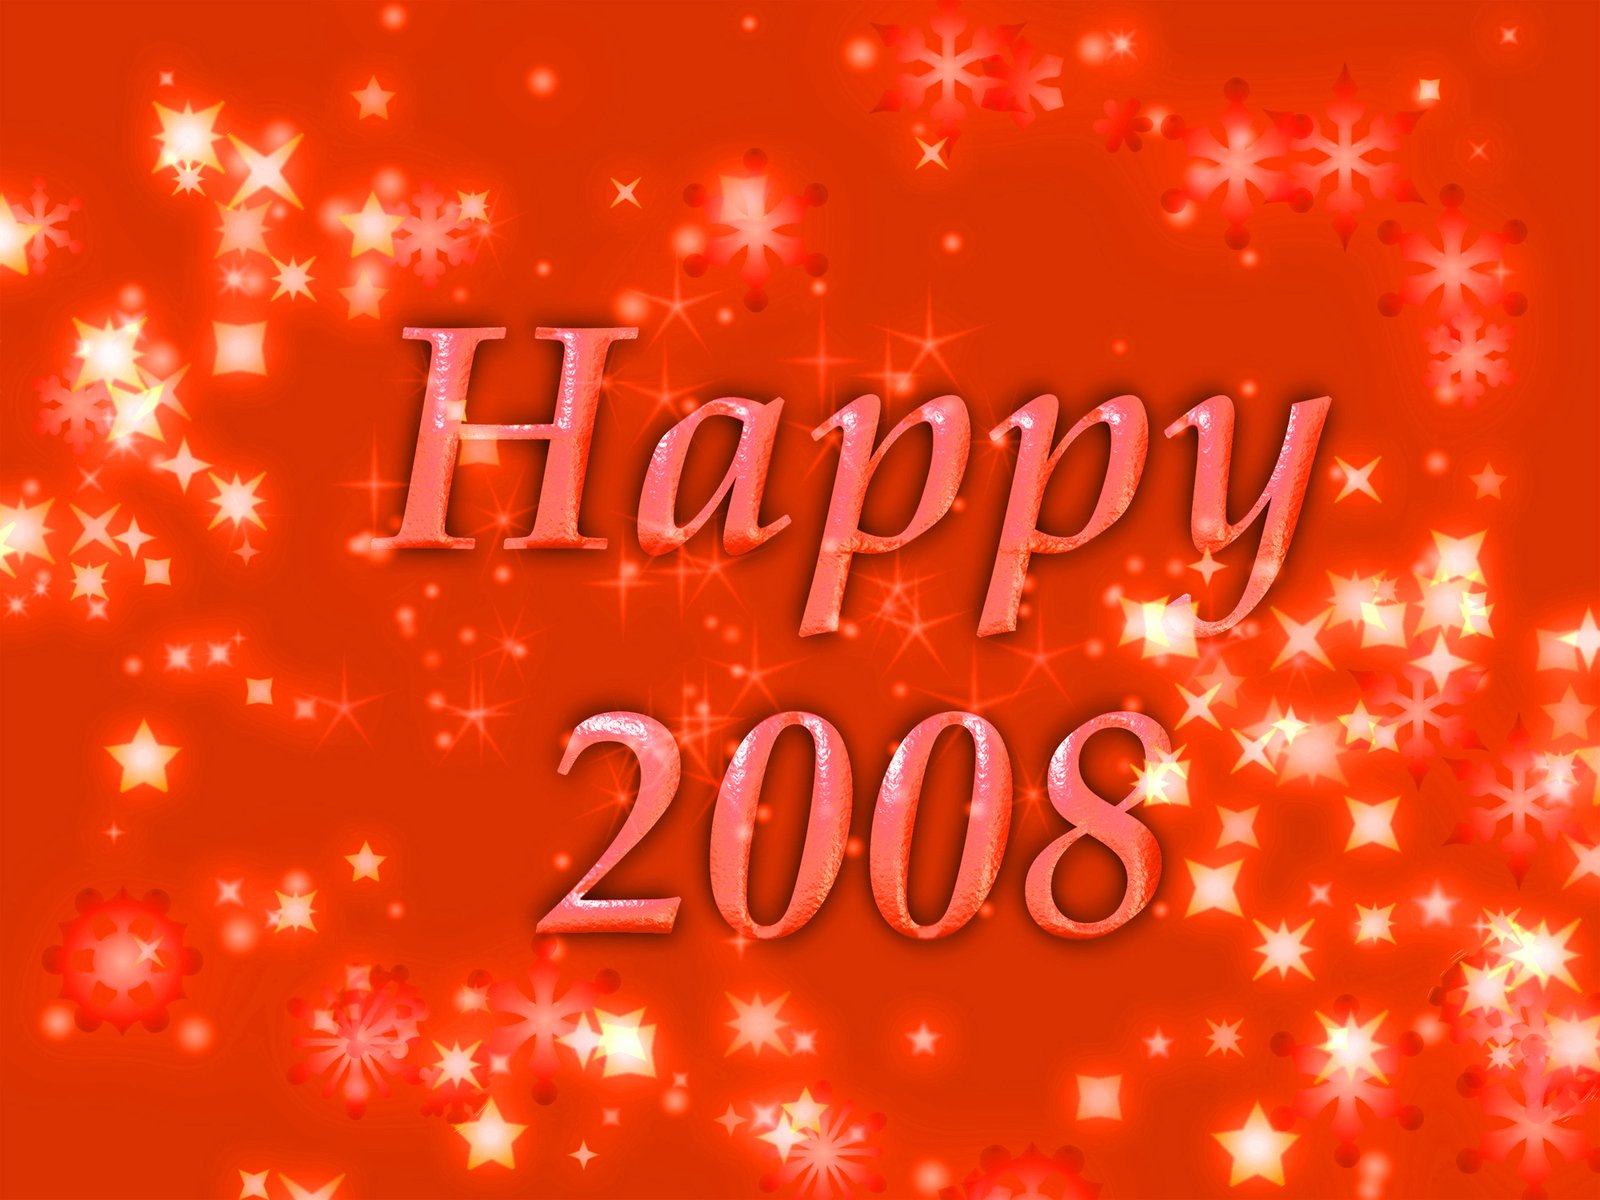 happy 2008 greeting card with stars and sparkles